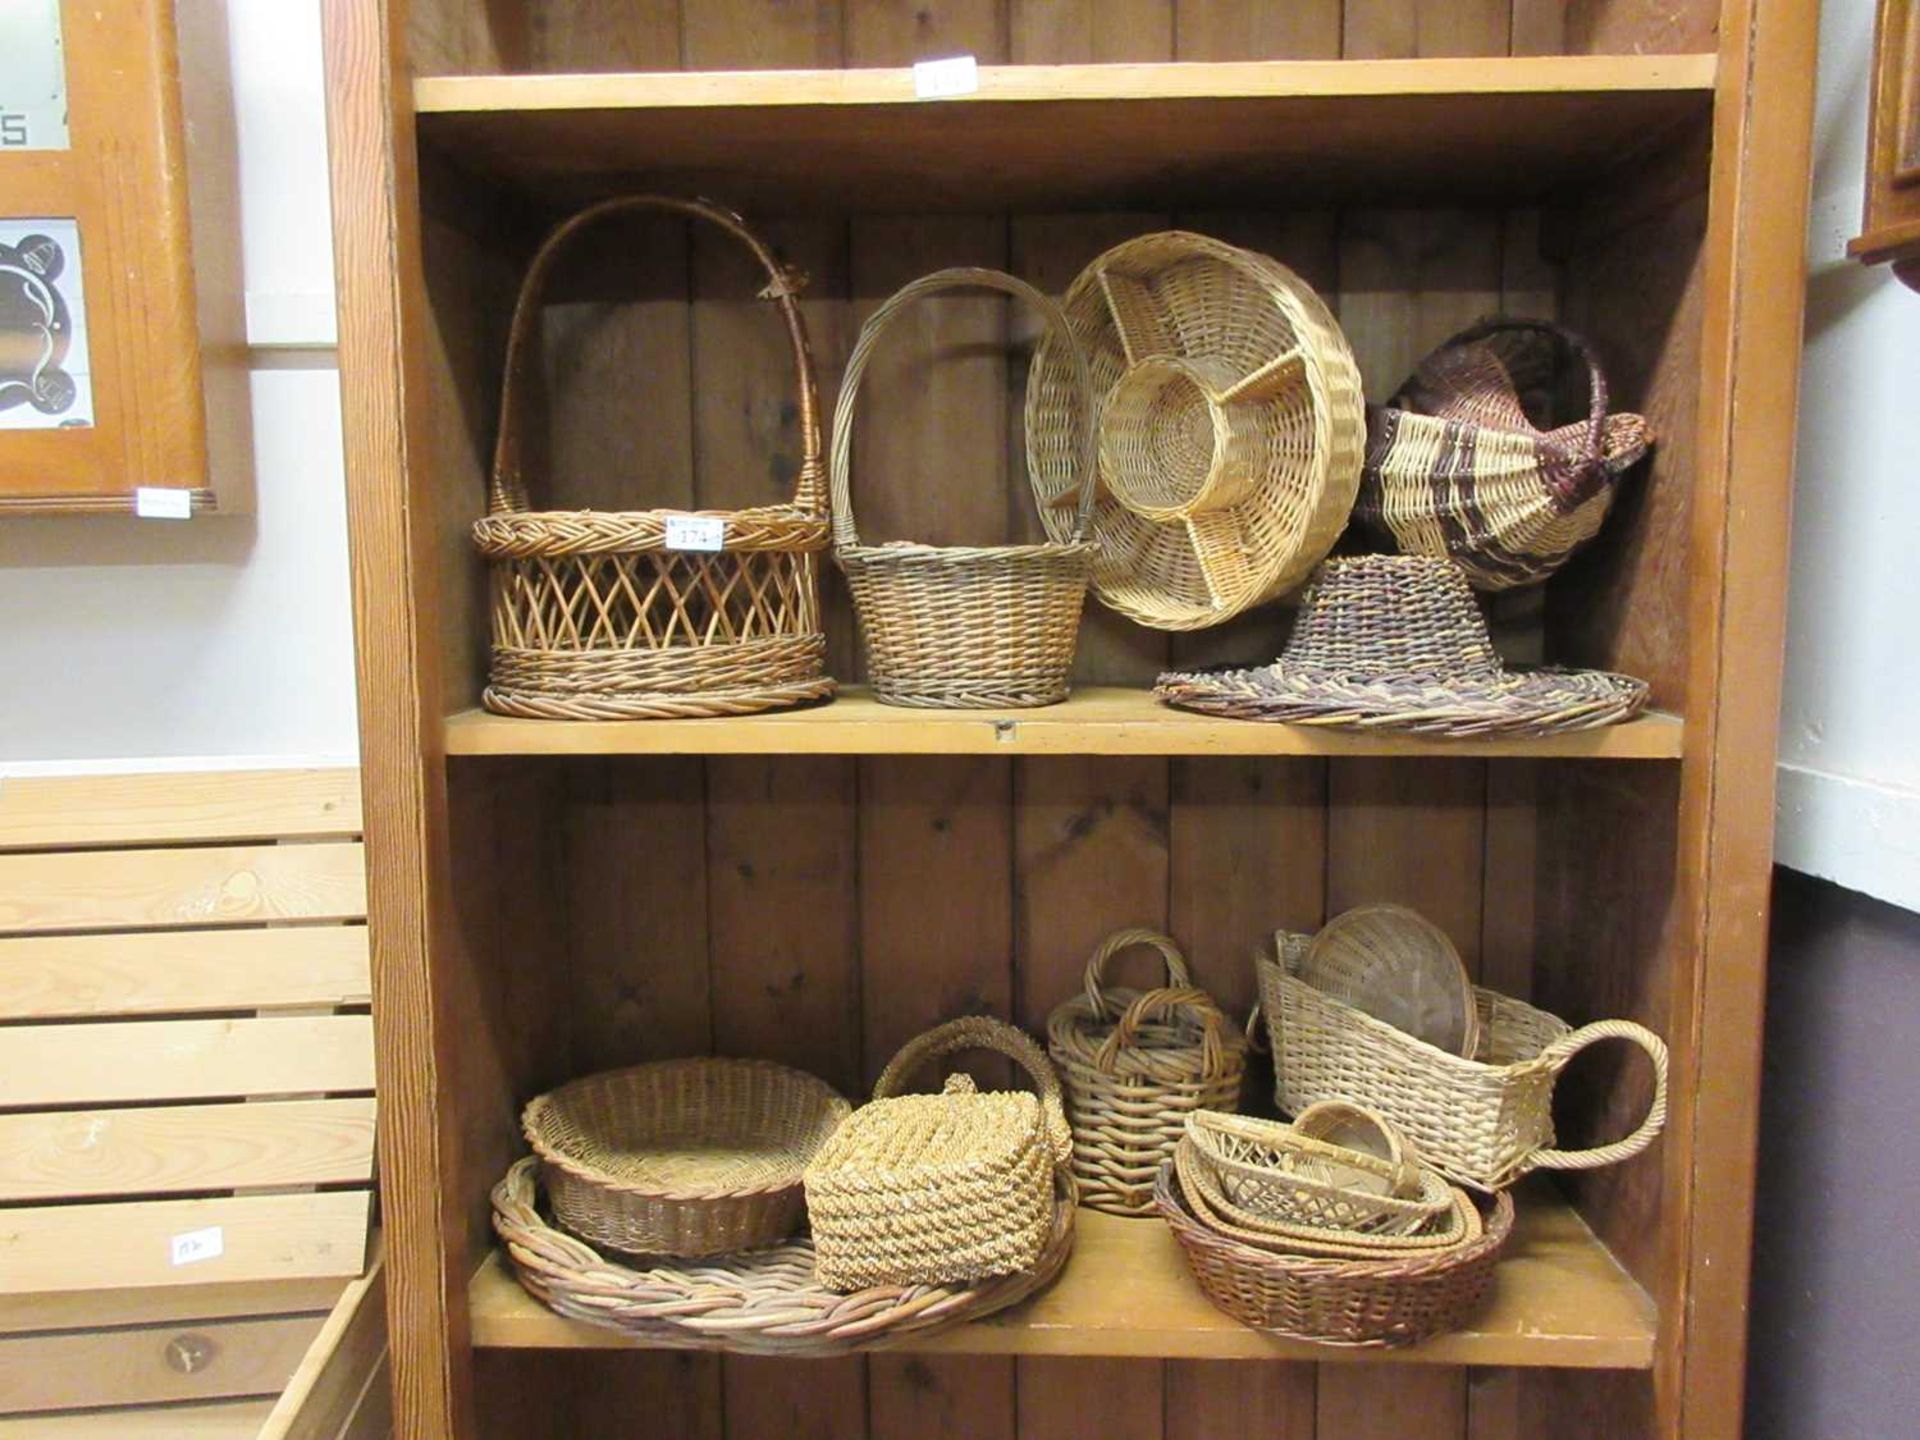 A large selection of wicker baskets